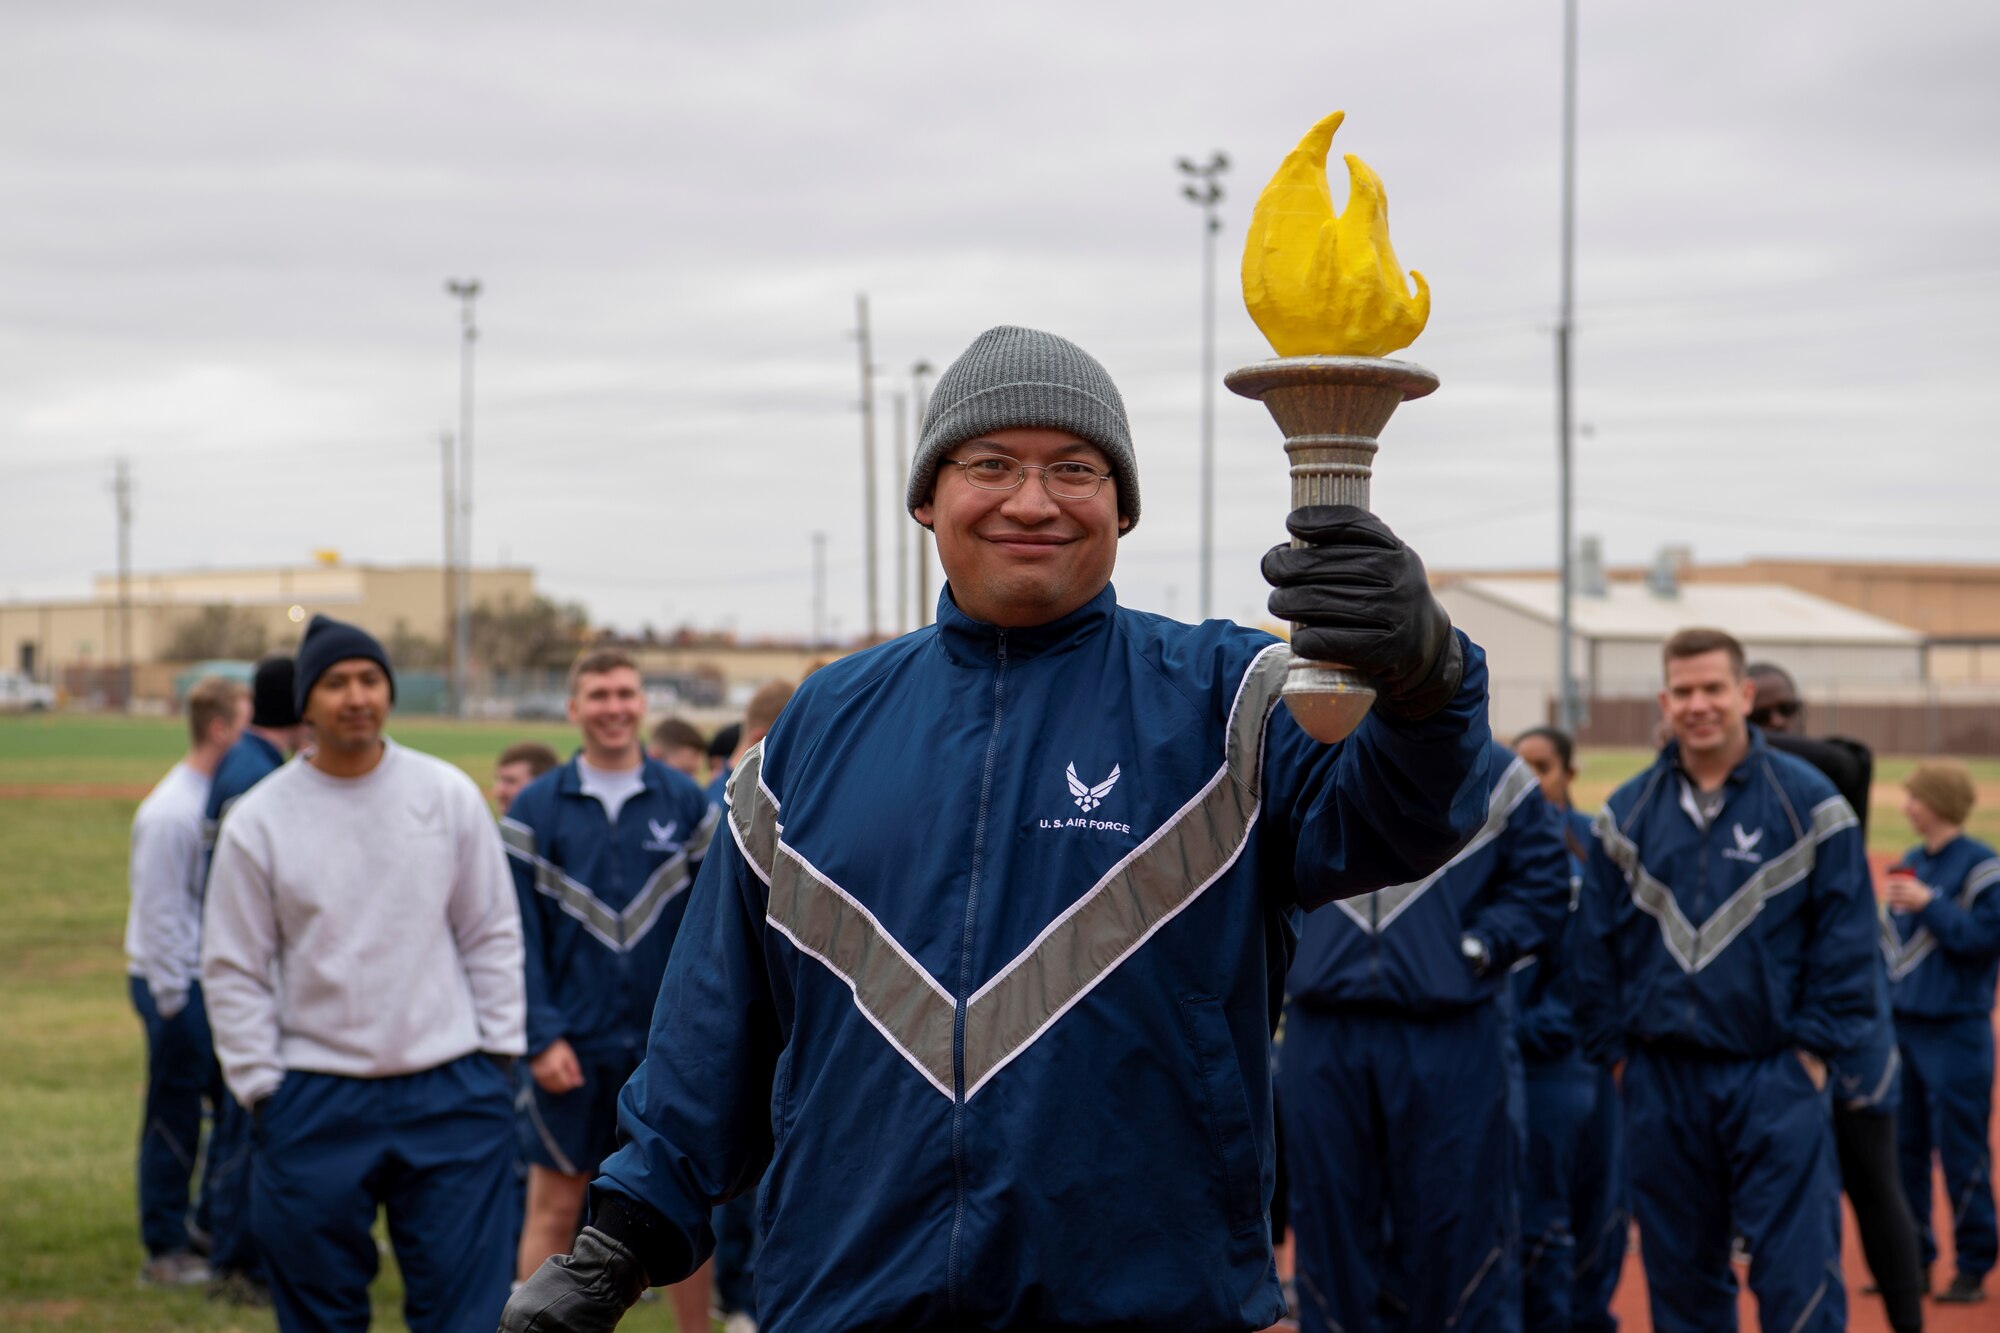 Tech. Sgt. James Reyes, 7th Operations Support Squadron aircrew flight equipment quality assurance NCO in charge, holds the torch for the sports day run at Dyess Air Force Base, Texas, Nov. 18, 2022. Dyess Airmen came together for sports day to show their unique strengths in diverse competitions while practicing teamwork and physical fitness. Competitions included a torch run, swimming, strong man challenge, volleyball, flag football, tug of war and a vehicle pull, with flash challenges throughout the day. (U.S. Air Force photo by Senior Airman Mercedes Porter)